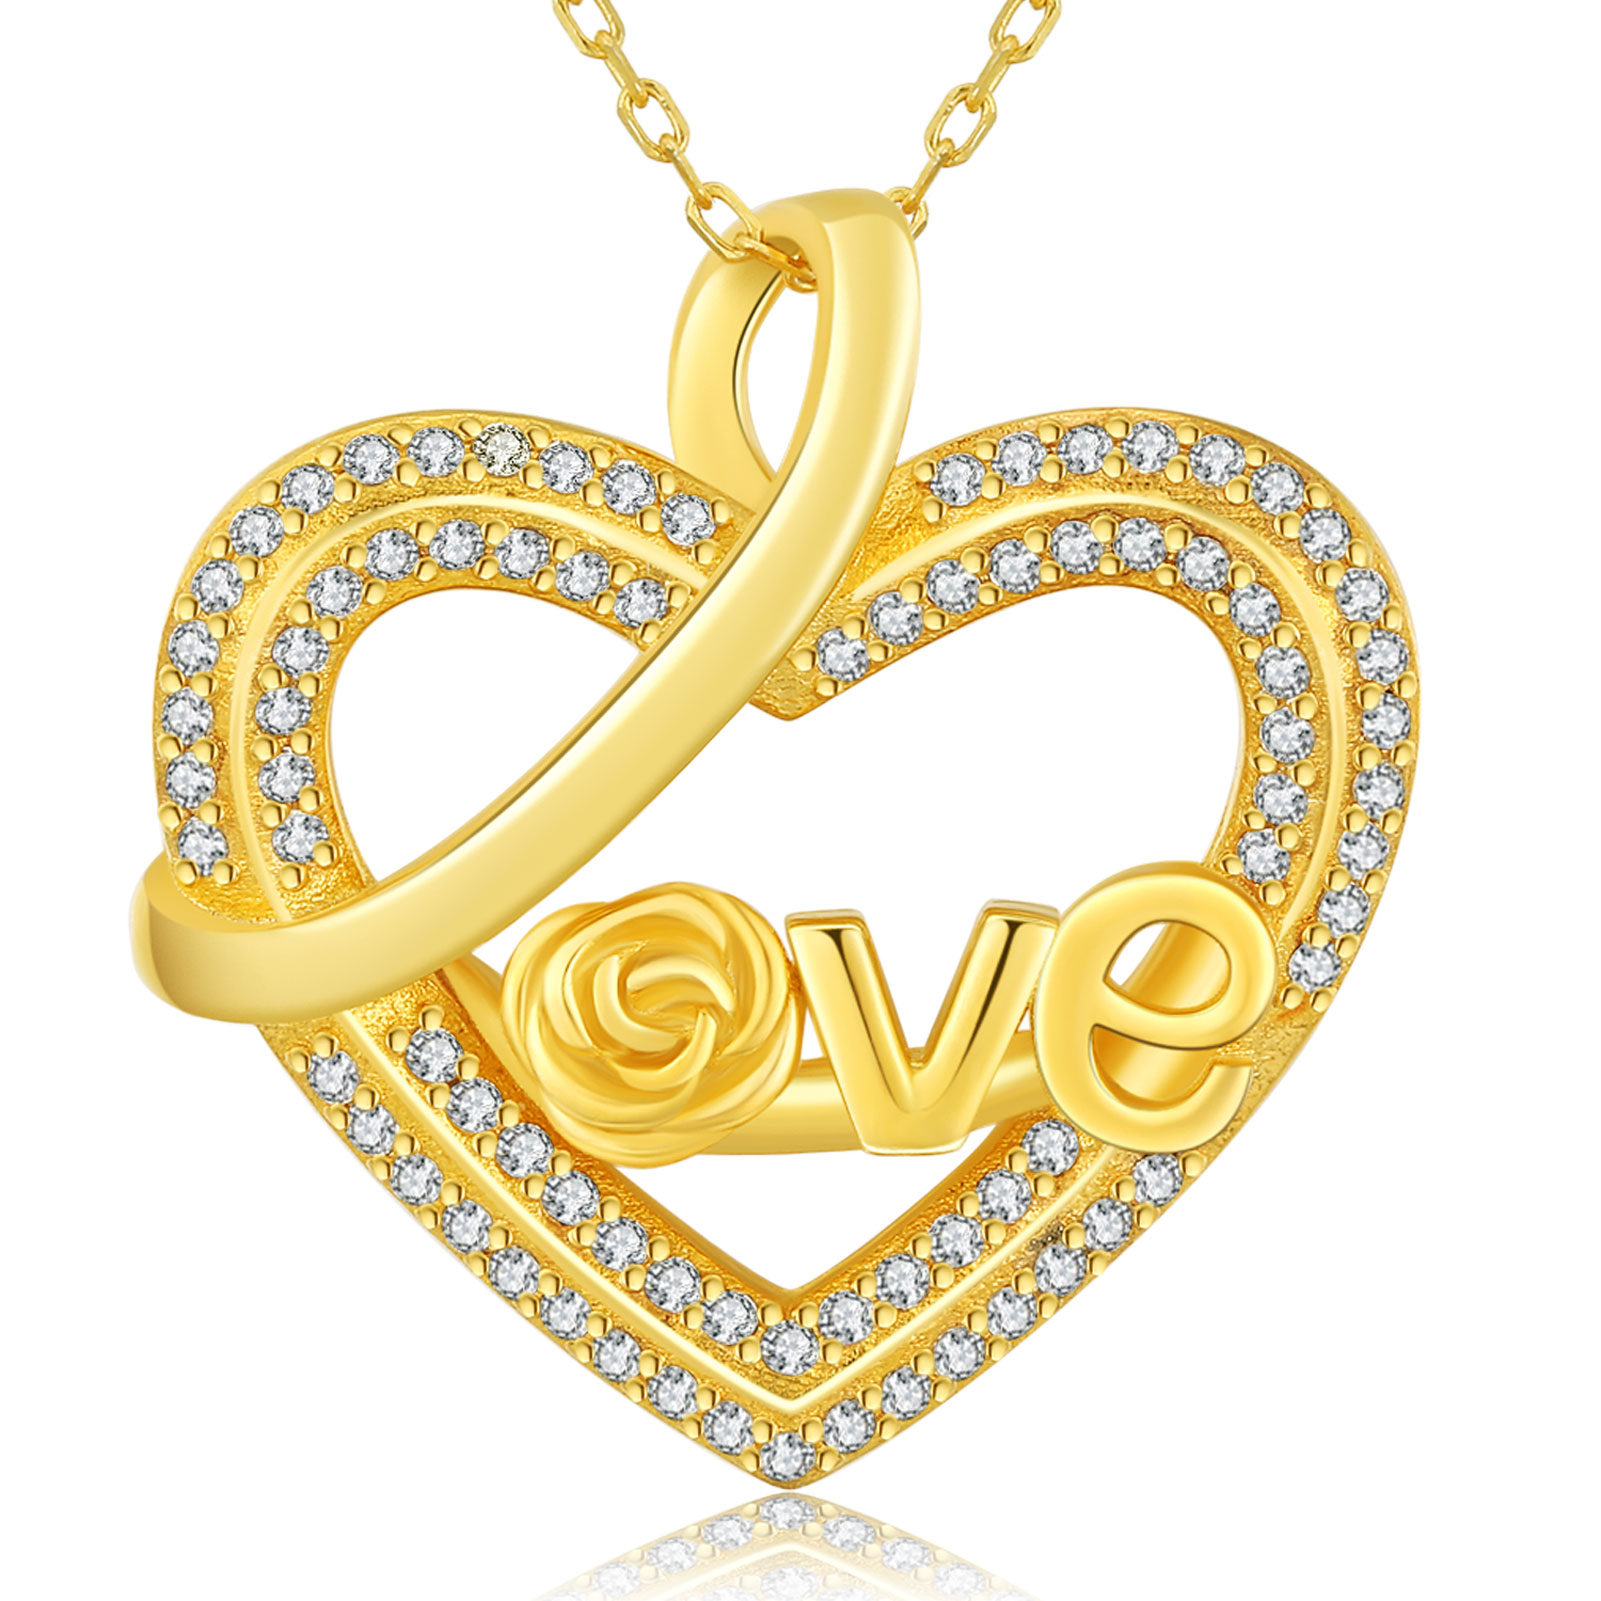 Merryshine S925 Sterling Silver Plated Gold Jewelry Love Letters Heart Pendent Necklace